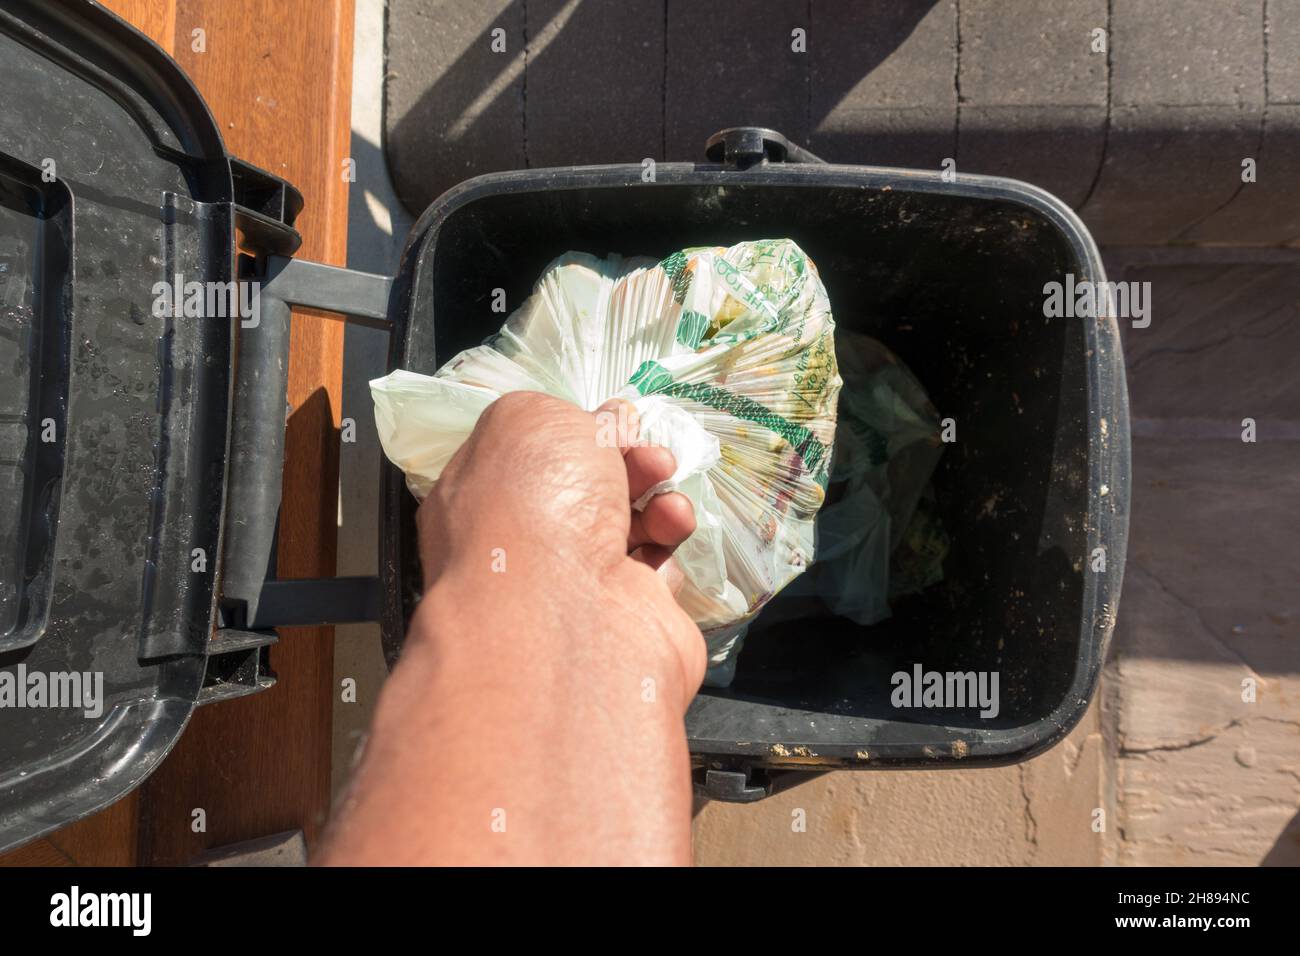 Adult male dropping a bio degradable bag of food waste into a food caddy bin Stock Photo